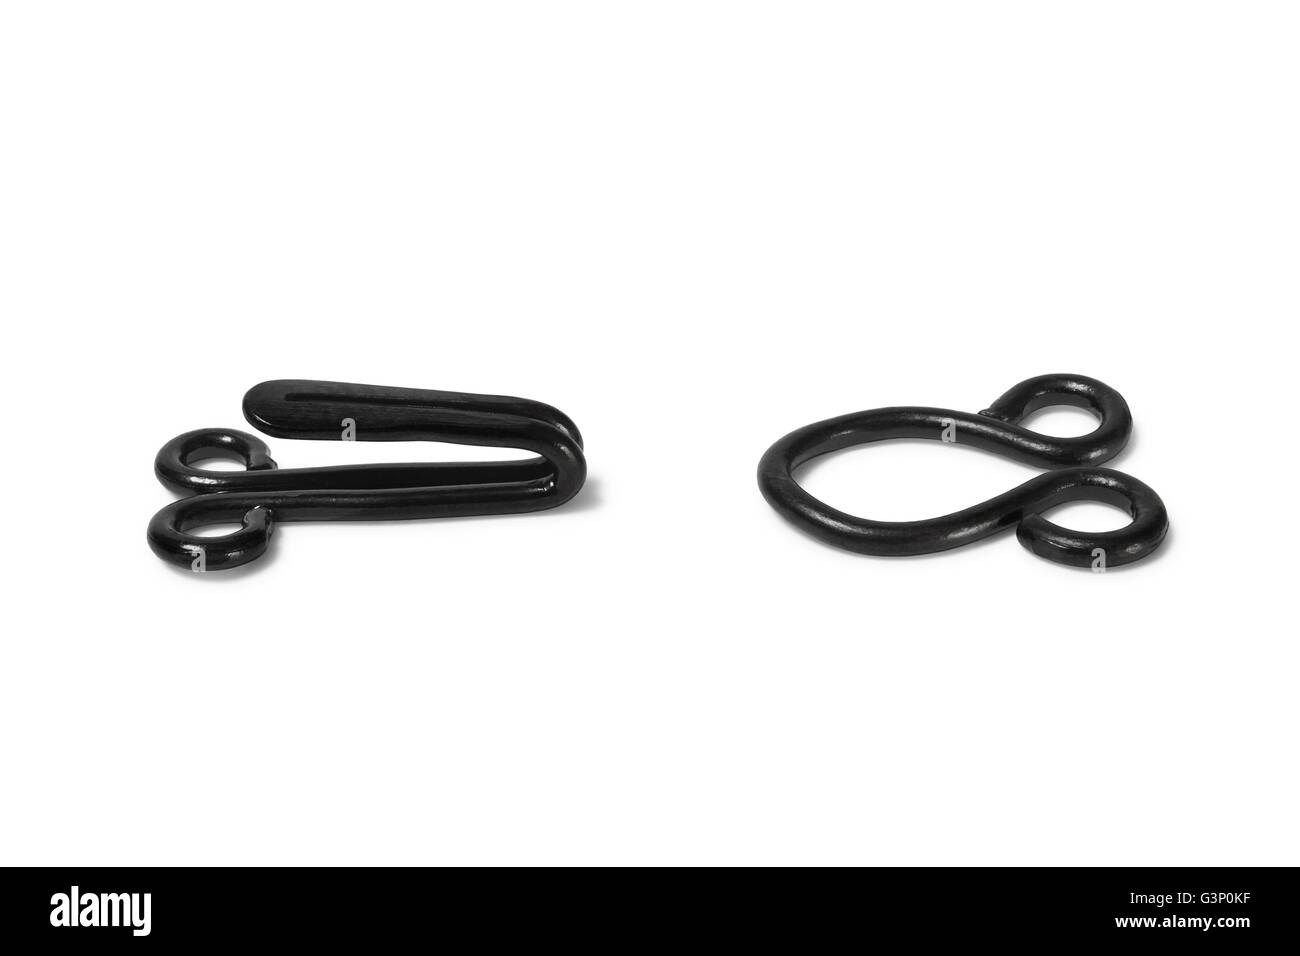 Hook and eye closure Black and White Stock Photos & Images - Alamy